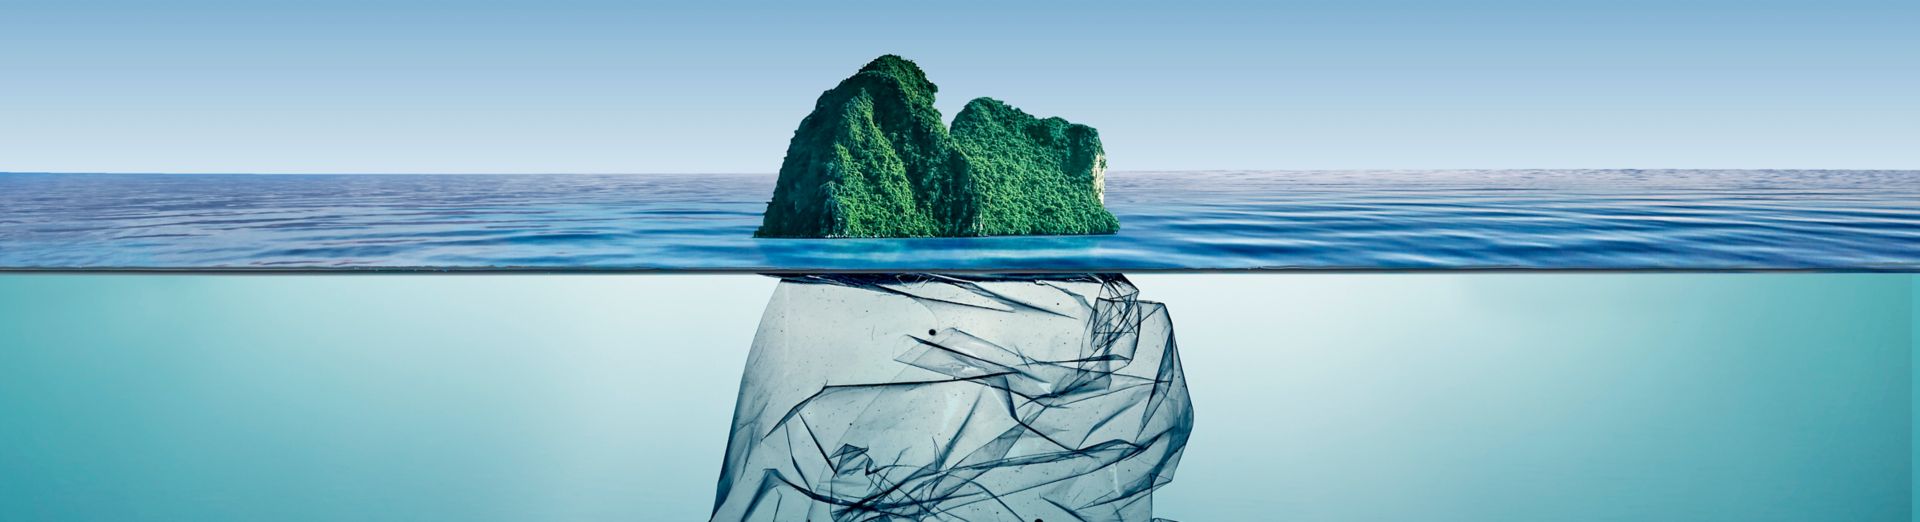  Garbage plastic with island floating in the ocean